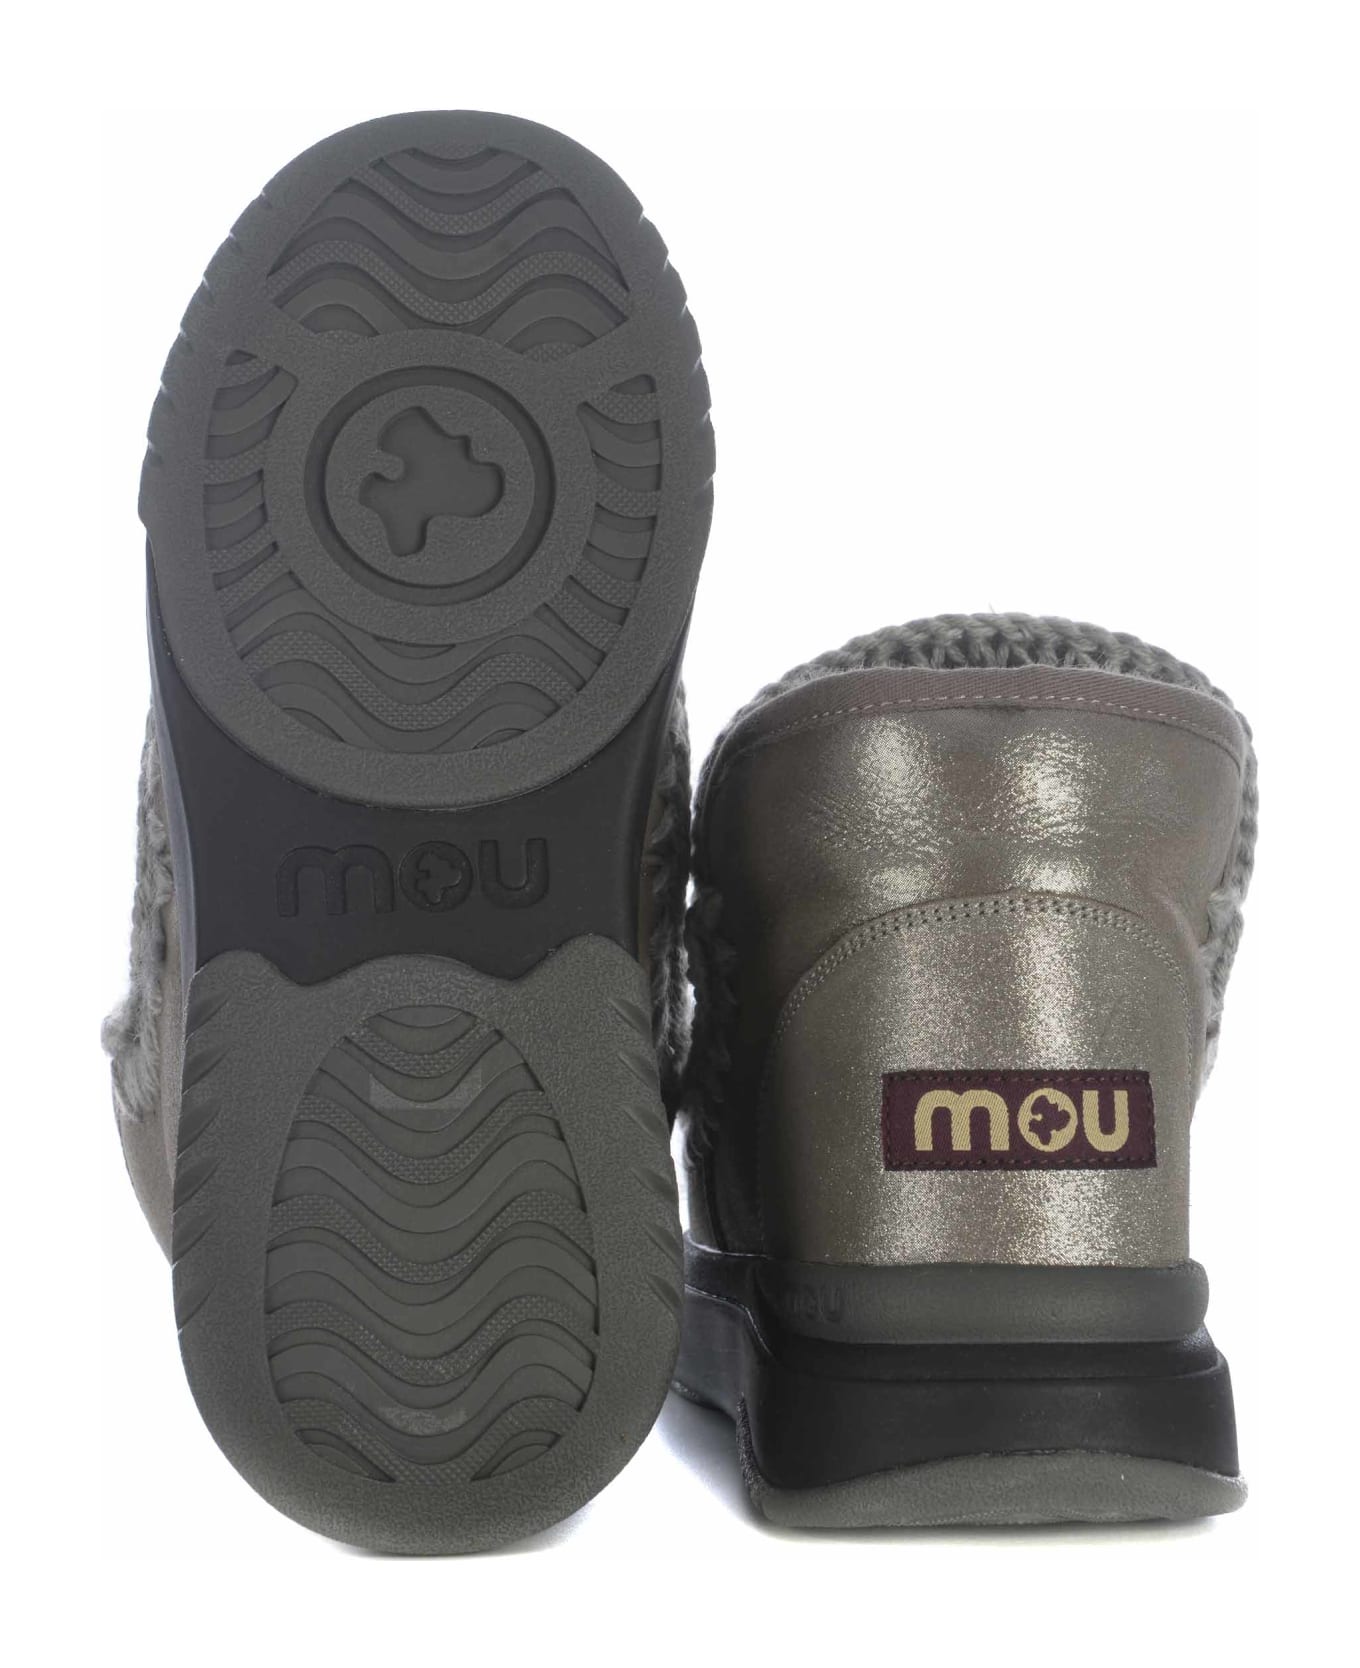 Mou Ankle Boots Mou "eskimo Jogger" Made Of Leather - Grigio argento ブーツ